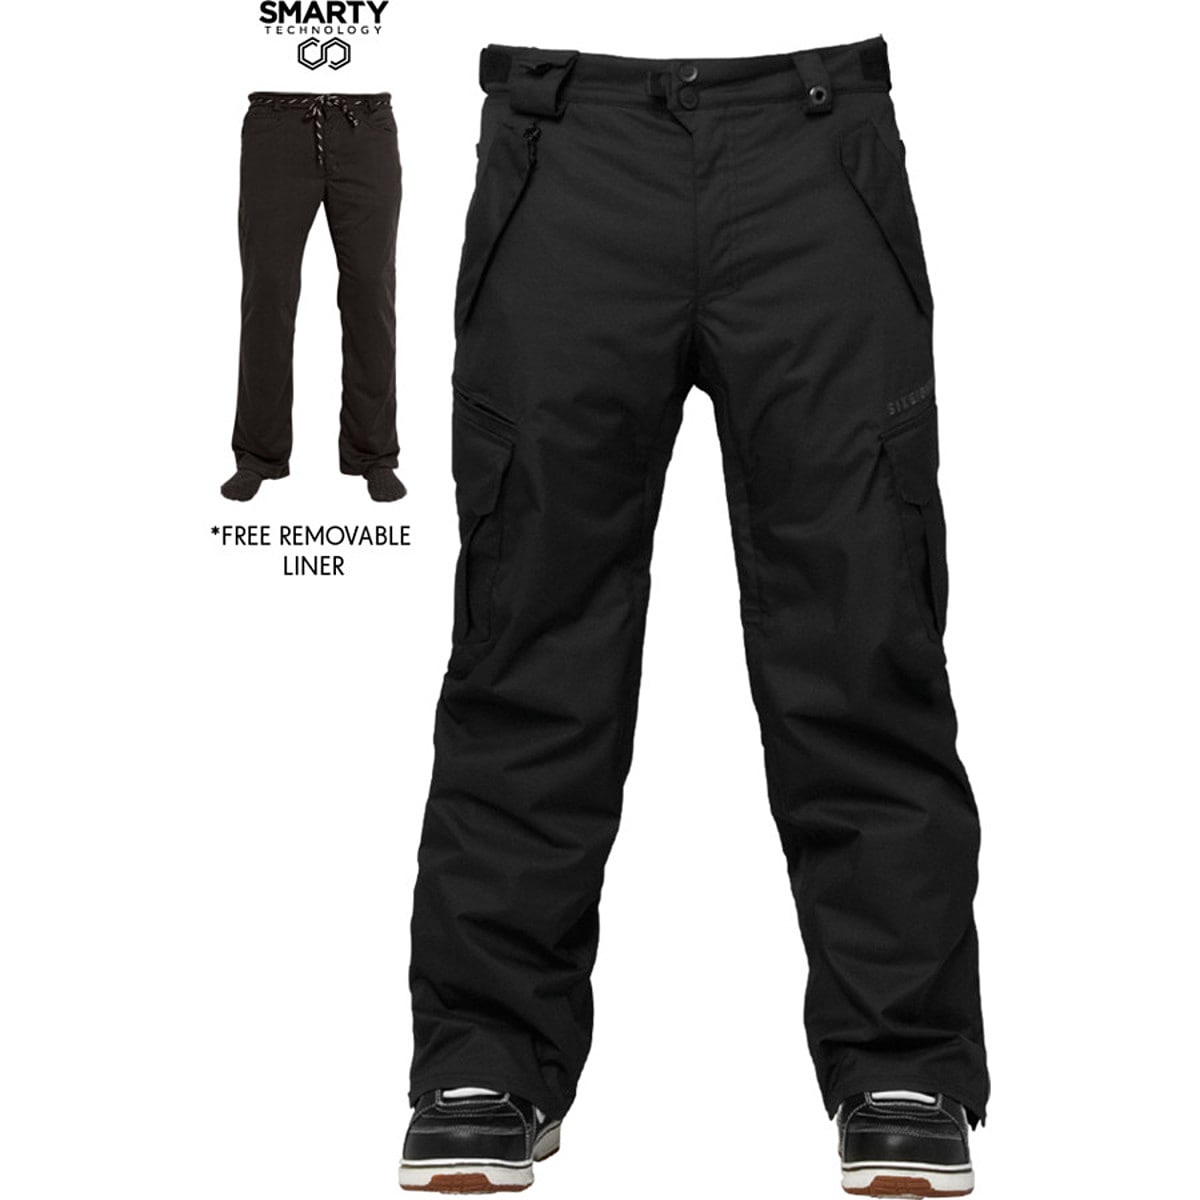 686 Authentic Smarty Cargo Tall 3-In-1 Pant - Men's - Clothing